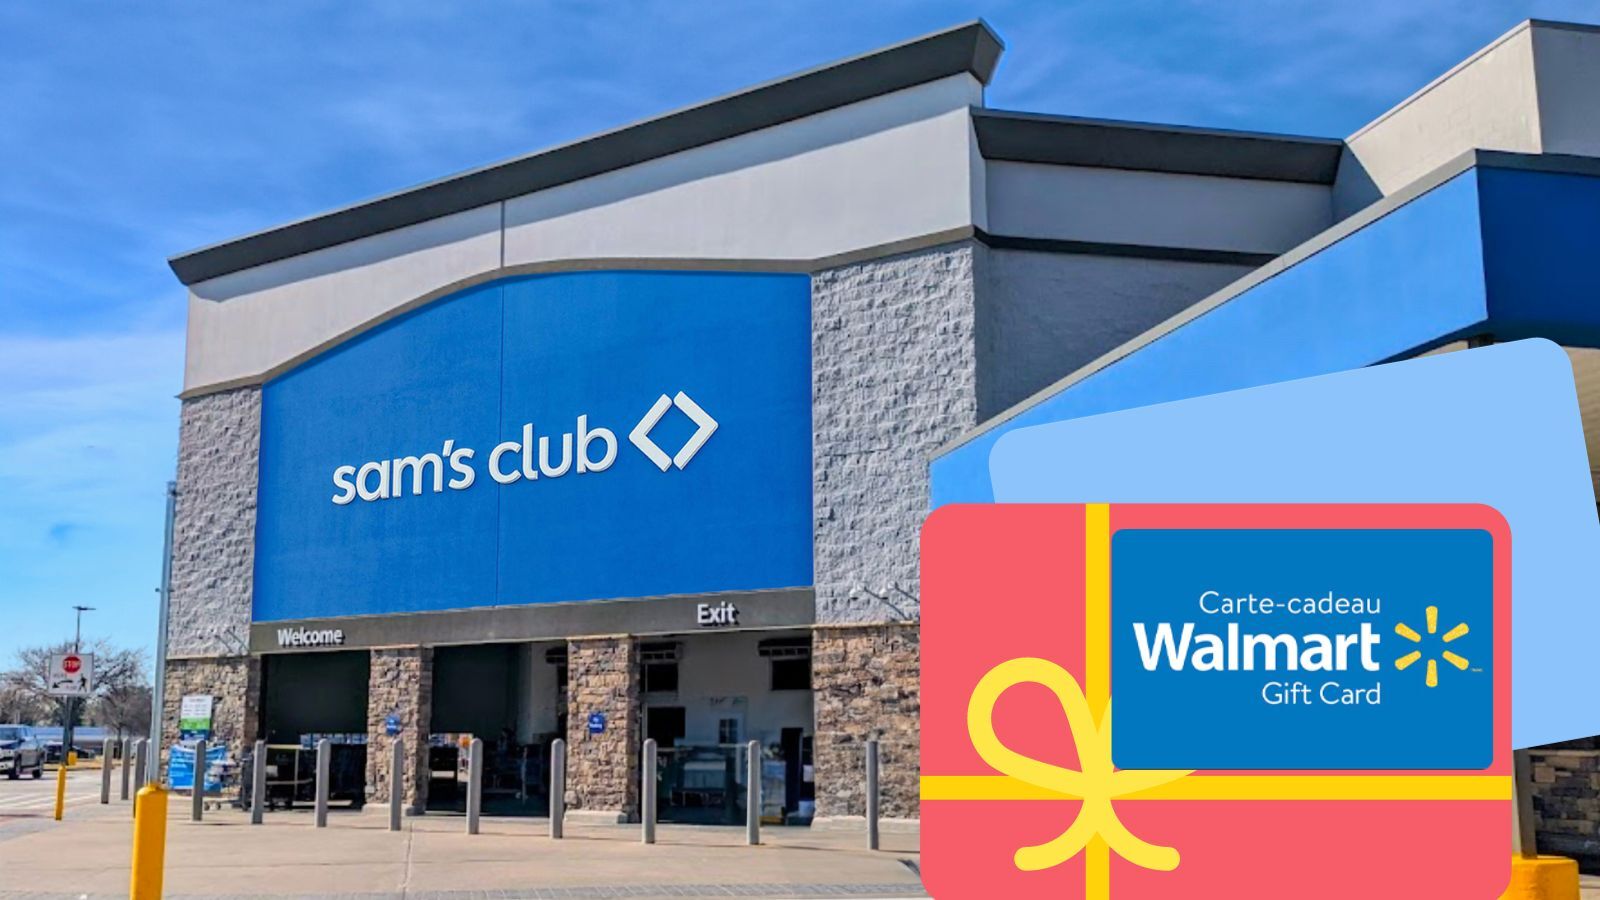 Can You Use A Walmart Gift Card At Sam’s Club?